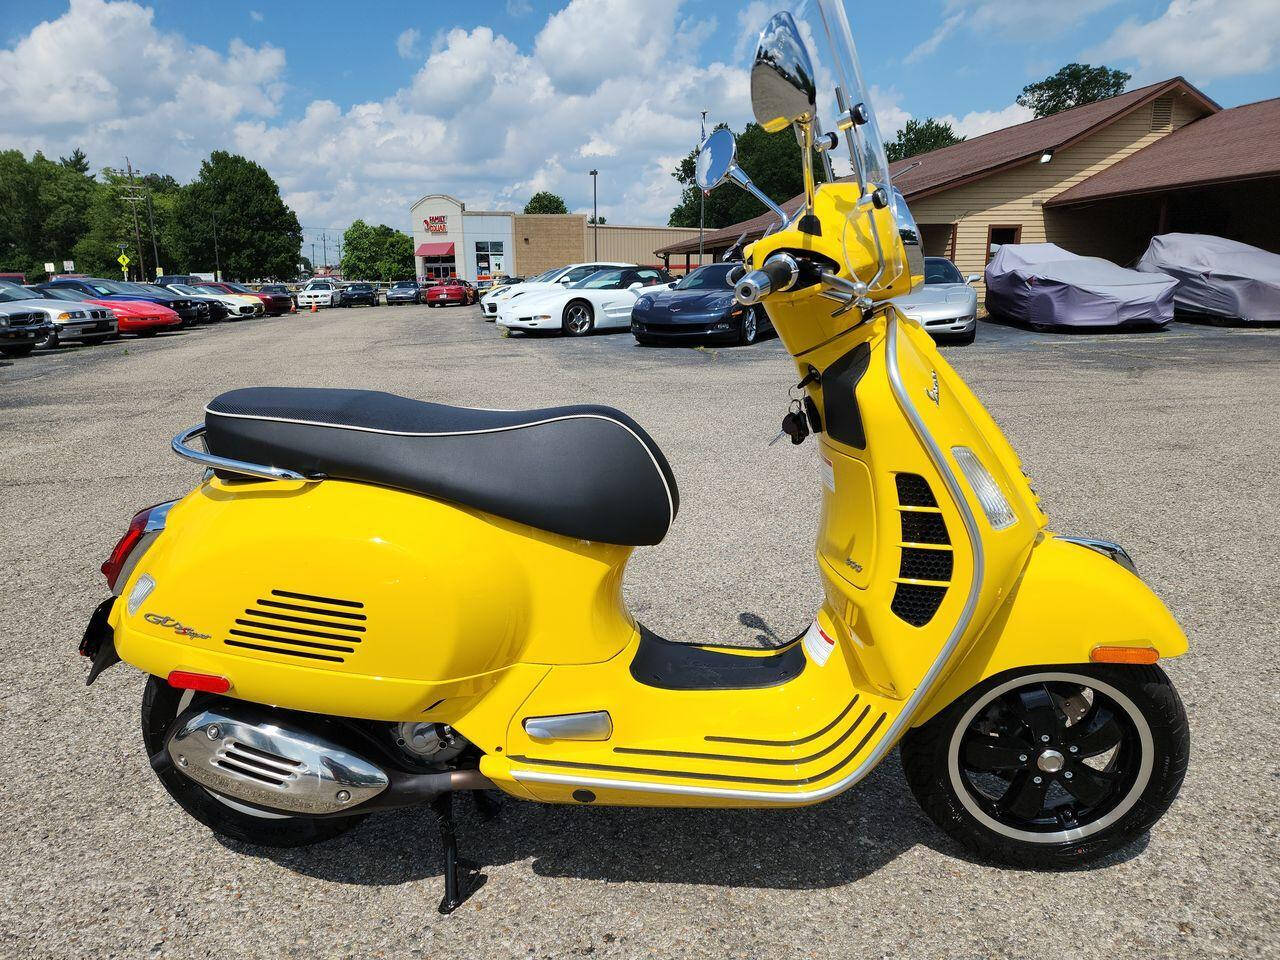 Vespa For Sale In Middletown, OH - ®